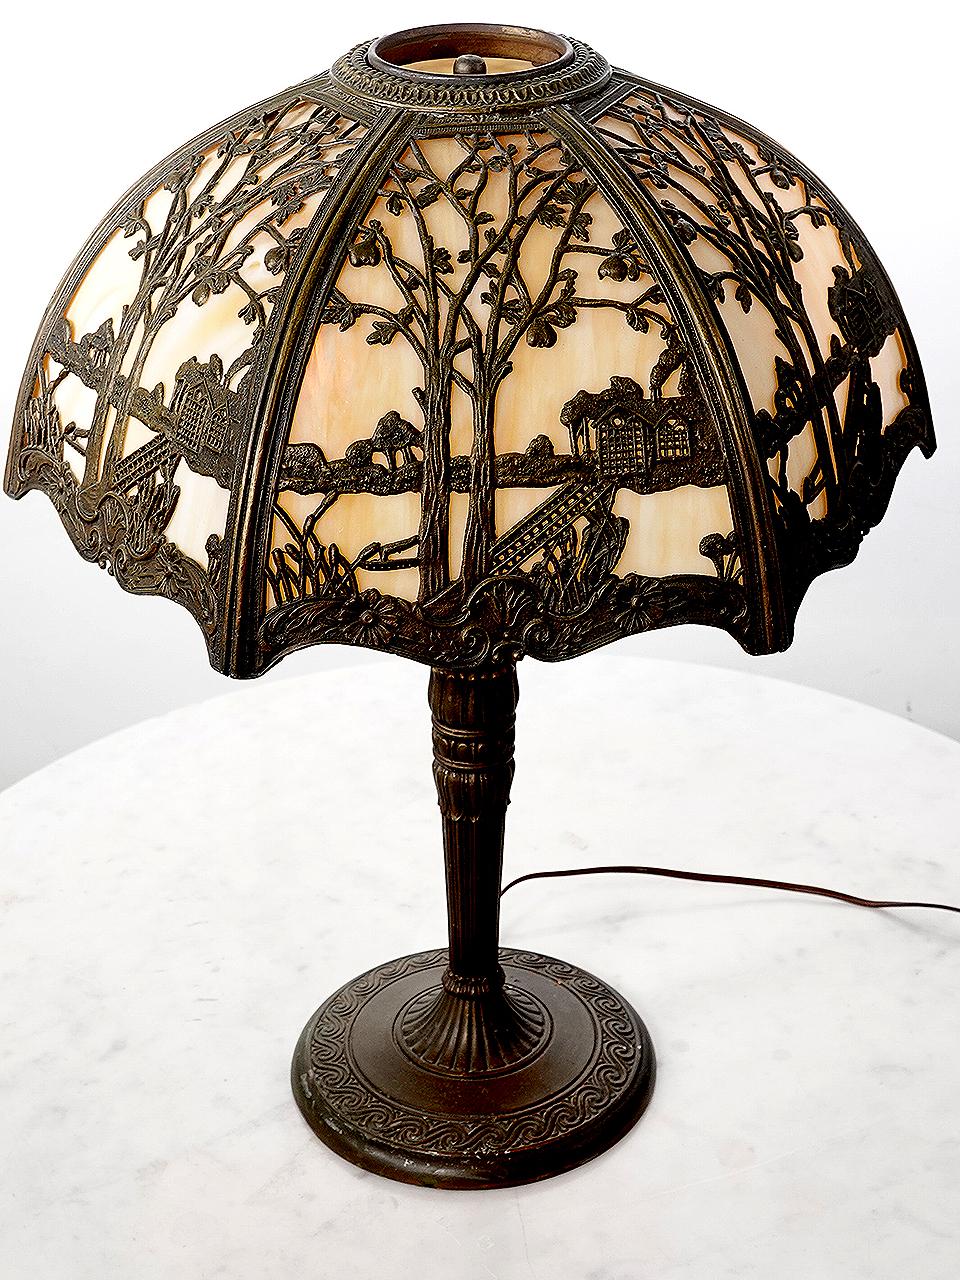 6 Panel Slump Glass Table Lamp with Landscape Filigree Overlay In Good Condition For Sale In Peekskill, NY